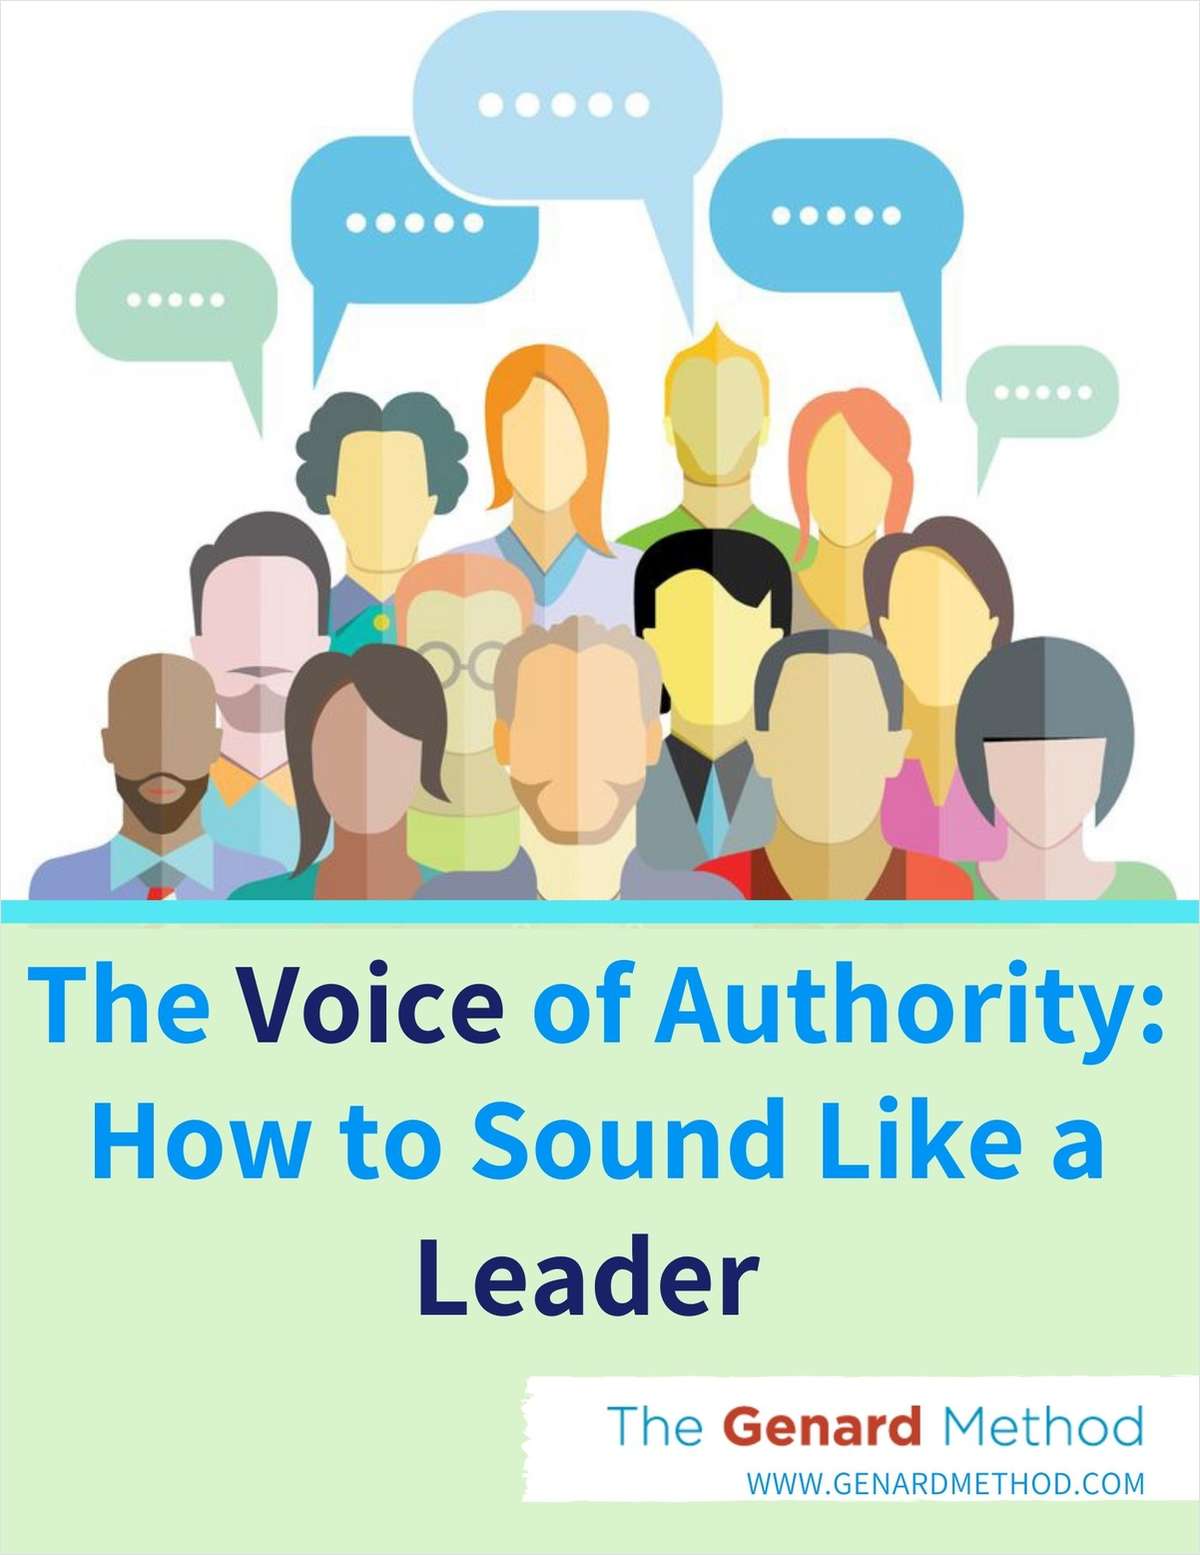 The Voice of Authority: How to Sound Like a Leader